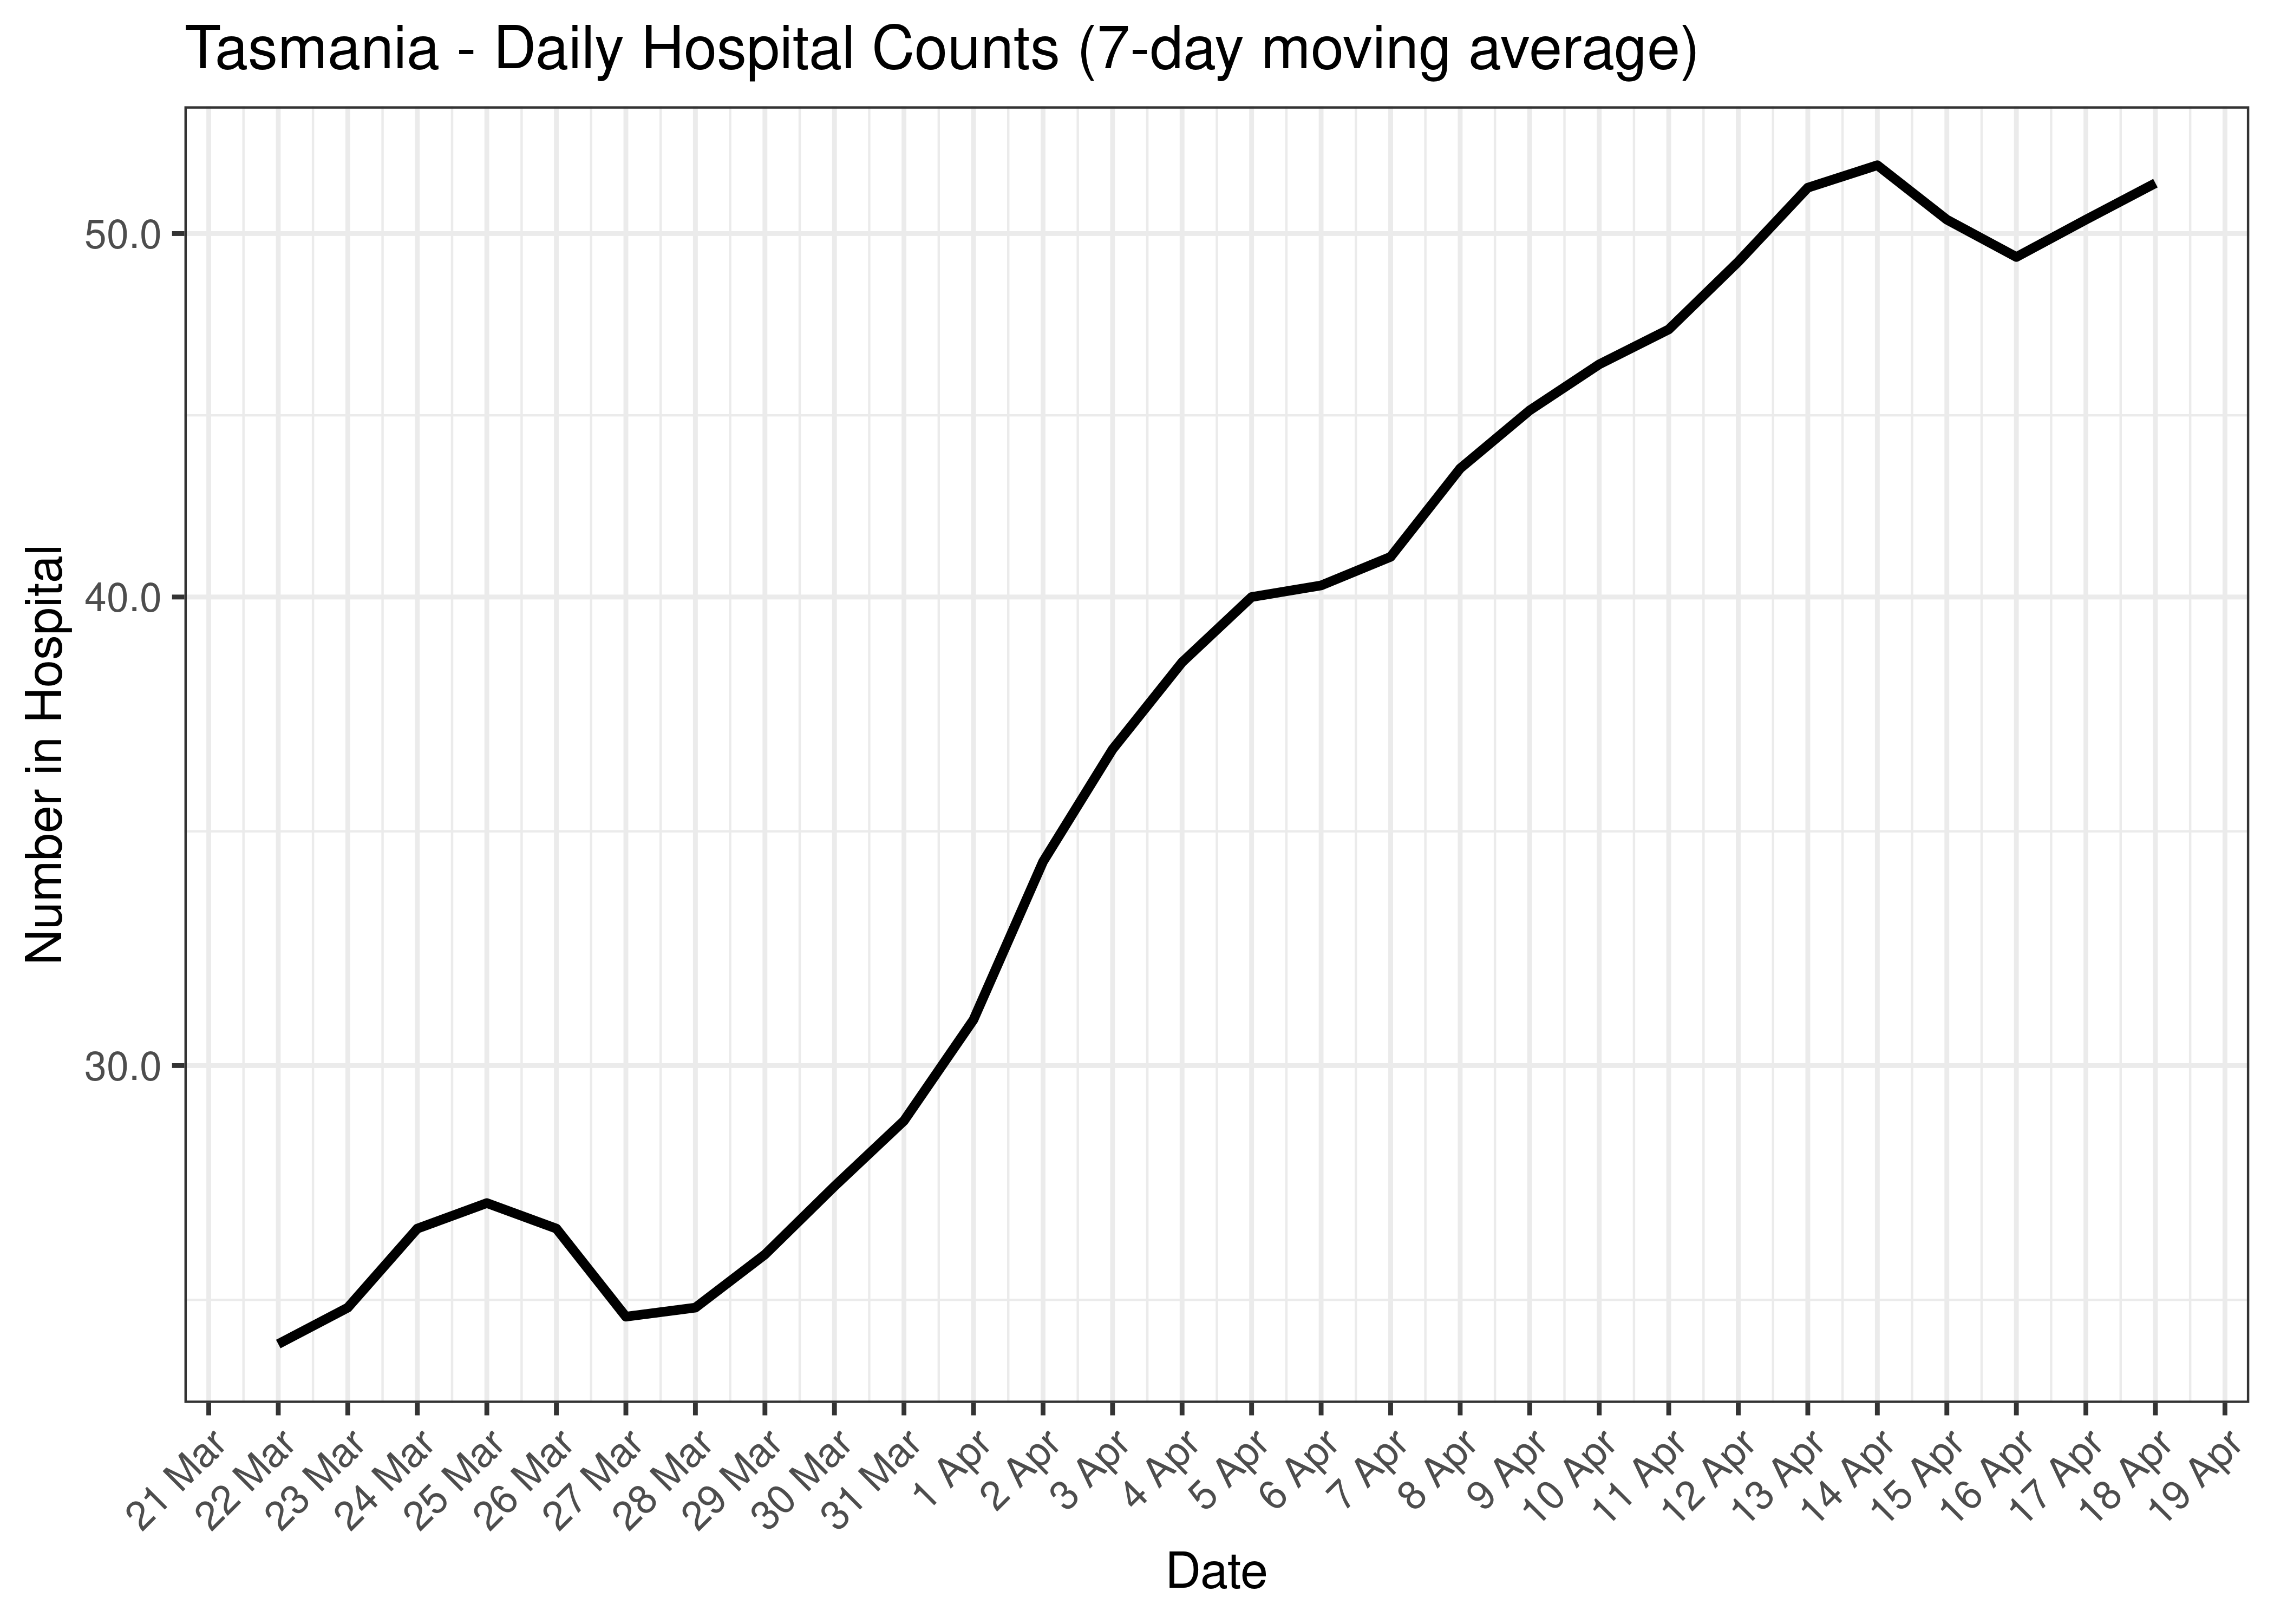 Tasmania - Daily Hospital Counts for Last 30-days (7-day moving average)